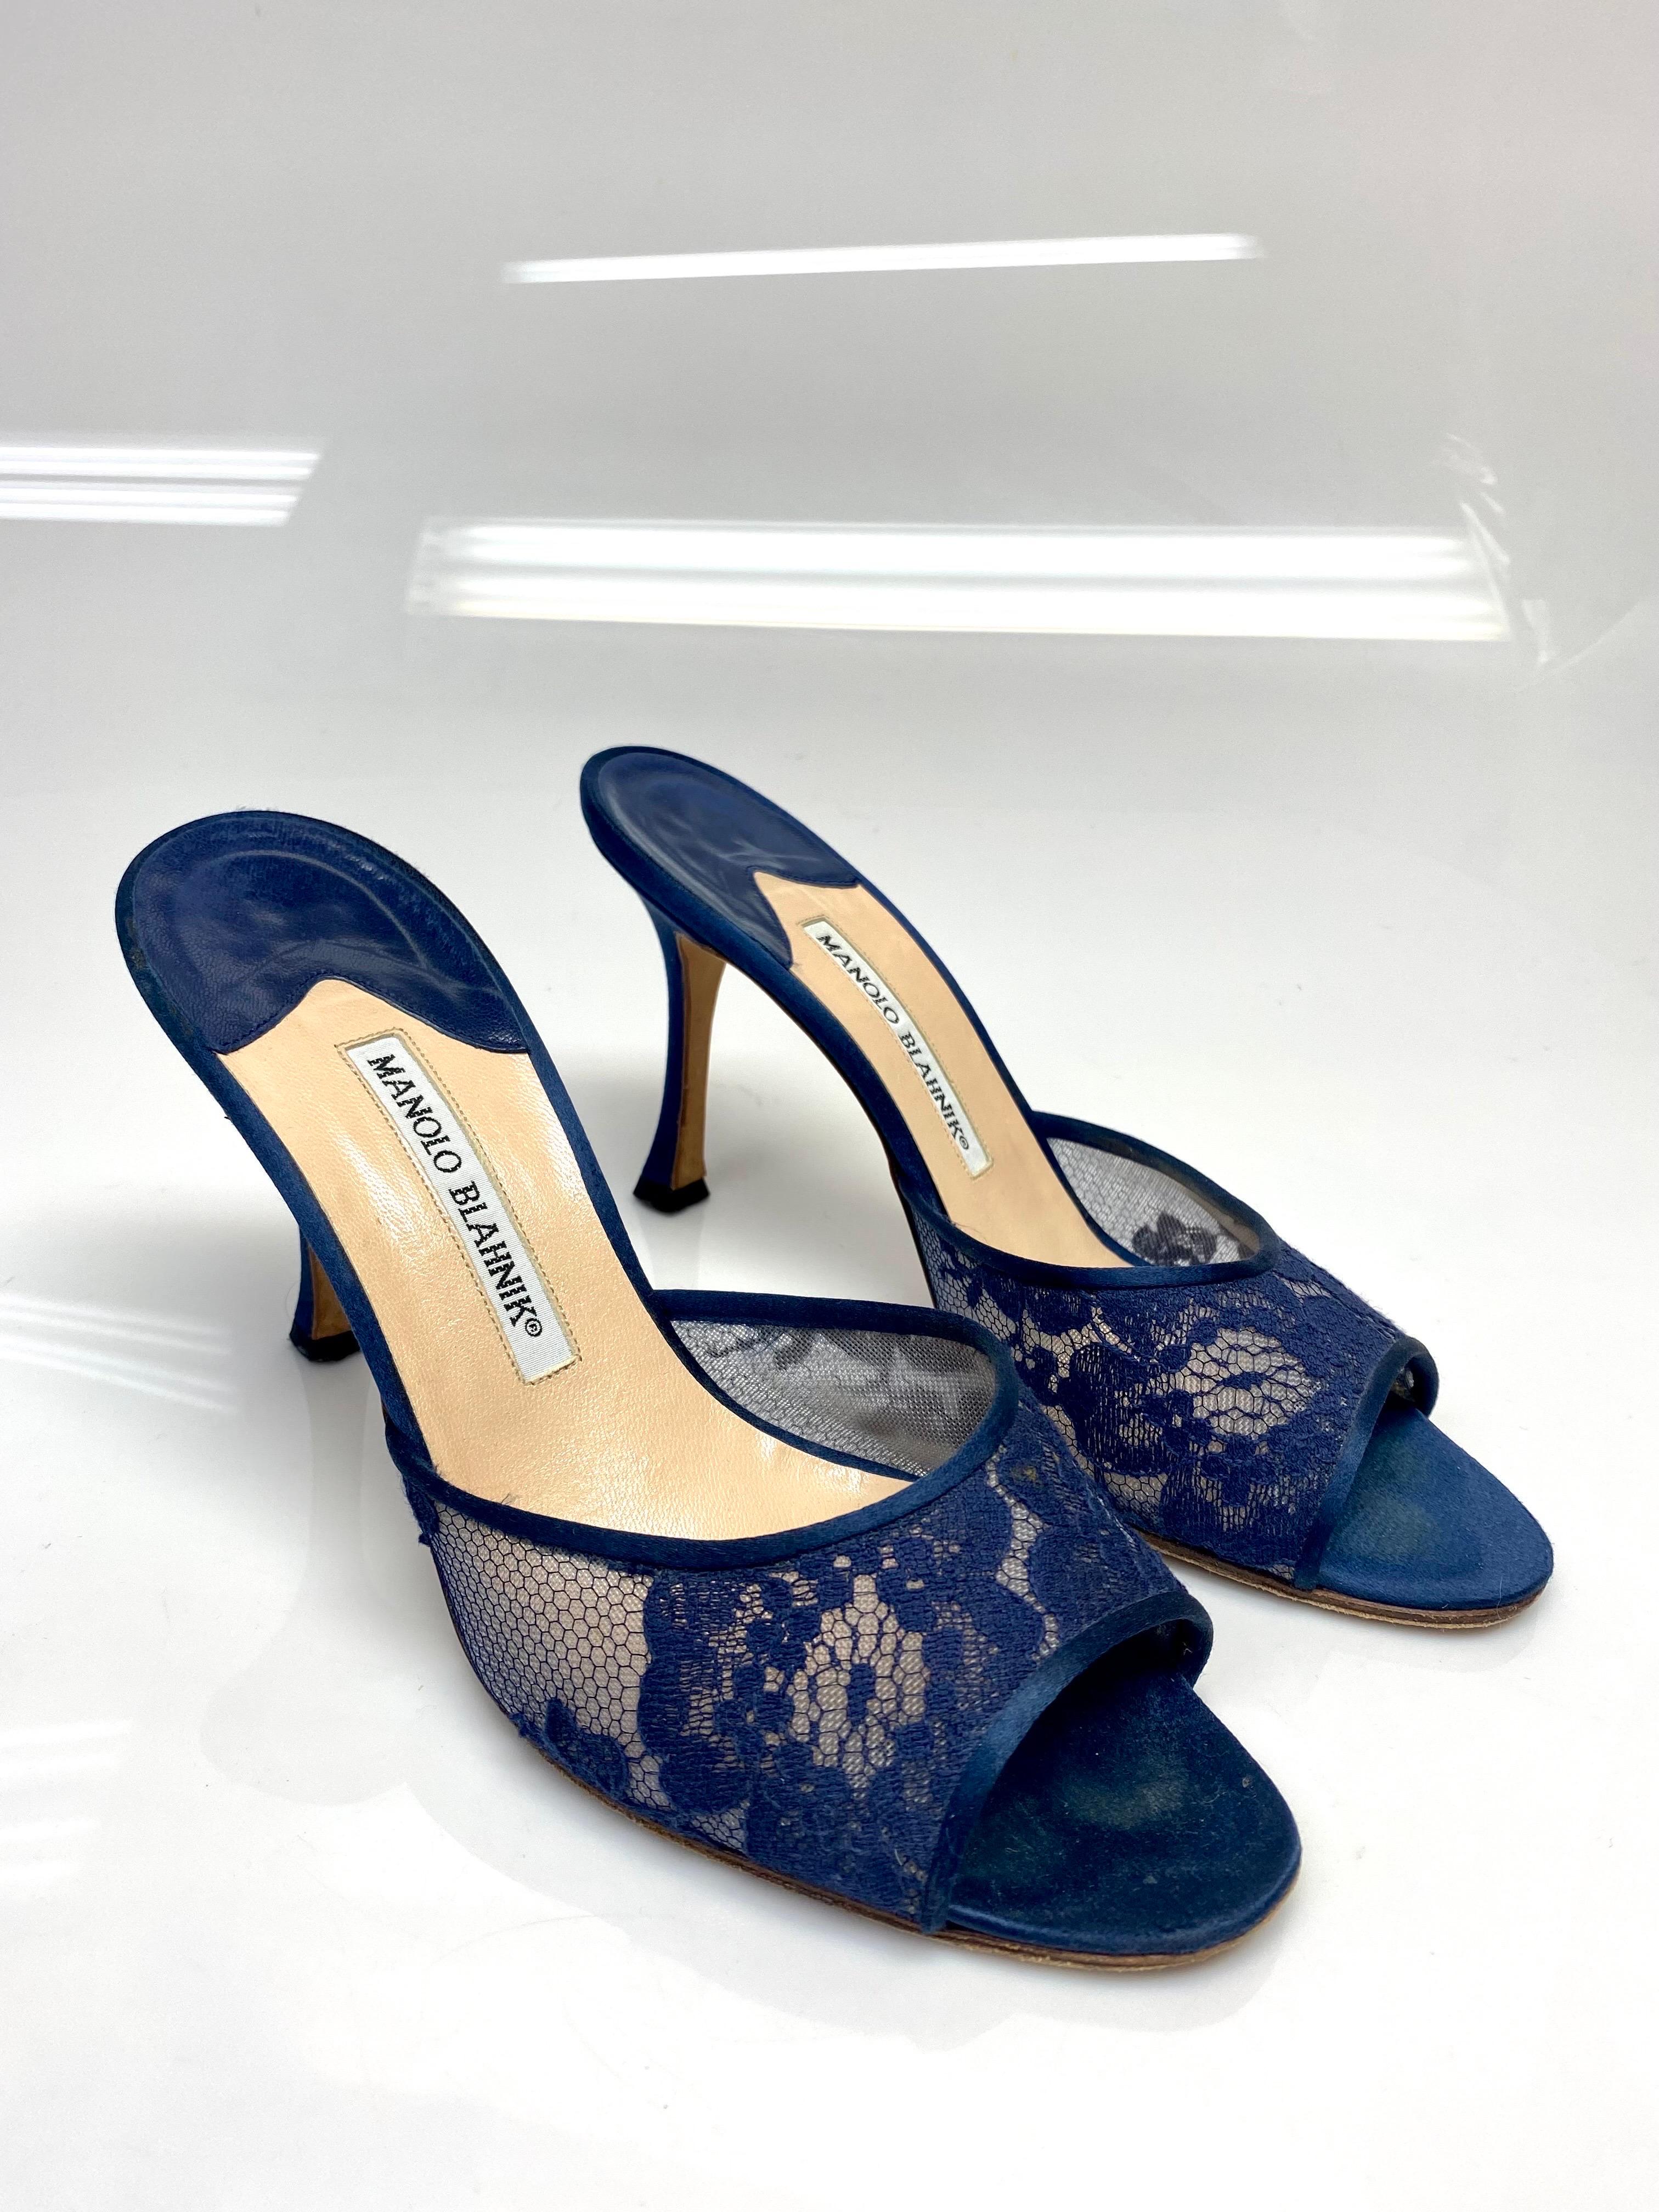 Manolo Blahnik Navy Lace Open Toe Heels size 38.5. It's a name synonymous with incredible footwear. For more than 40 years, Manolo Blahnik has created the world's most sought-after shoes, from classic flats to statement heels. These little lace